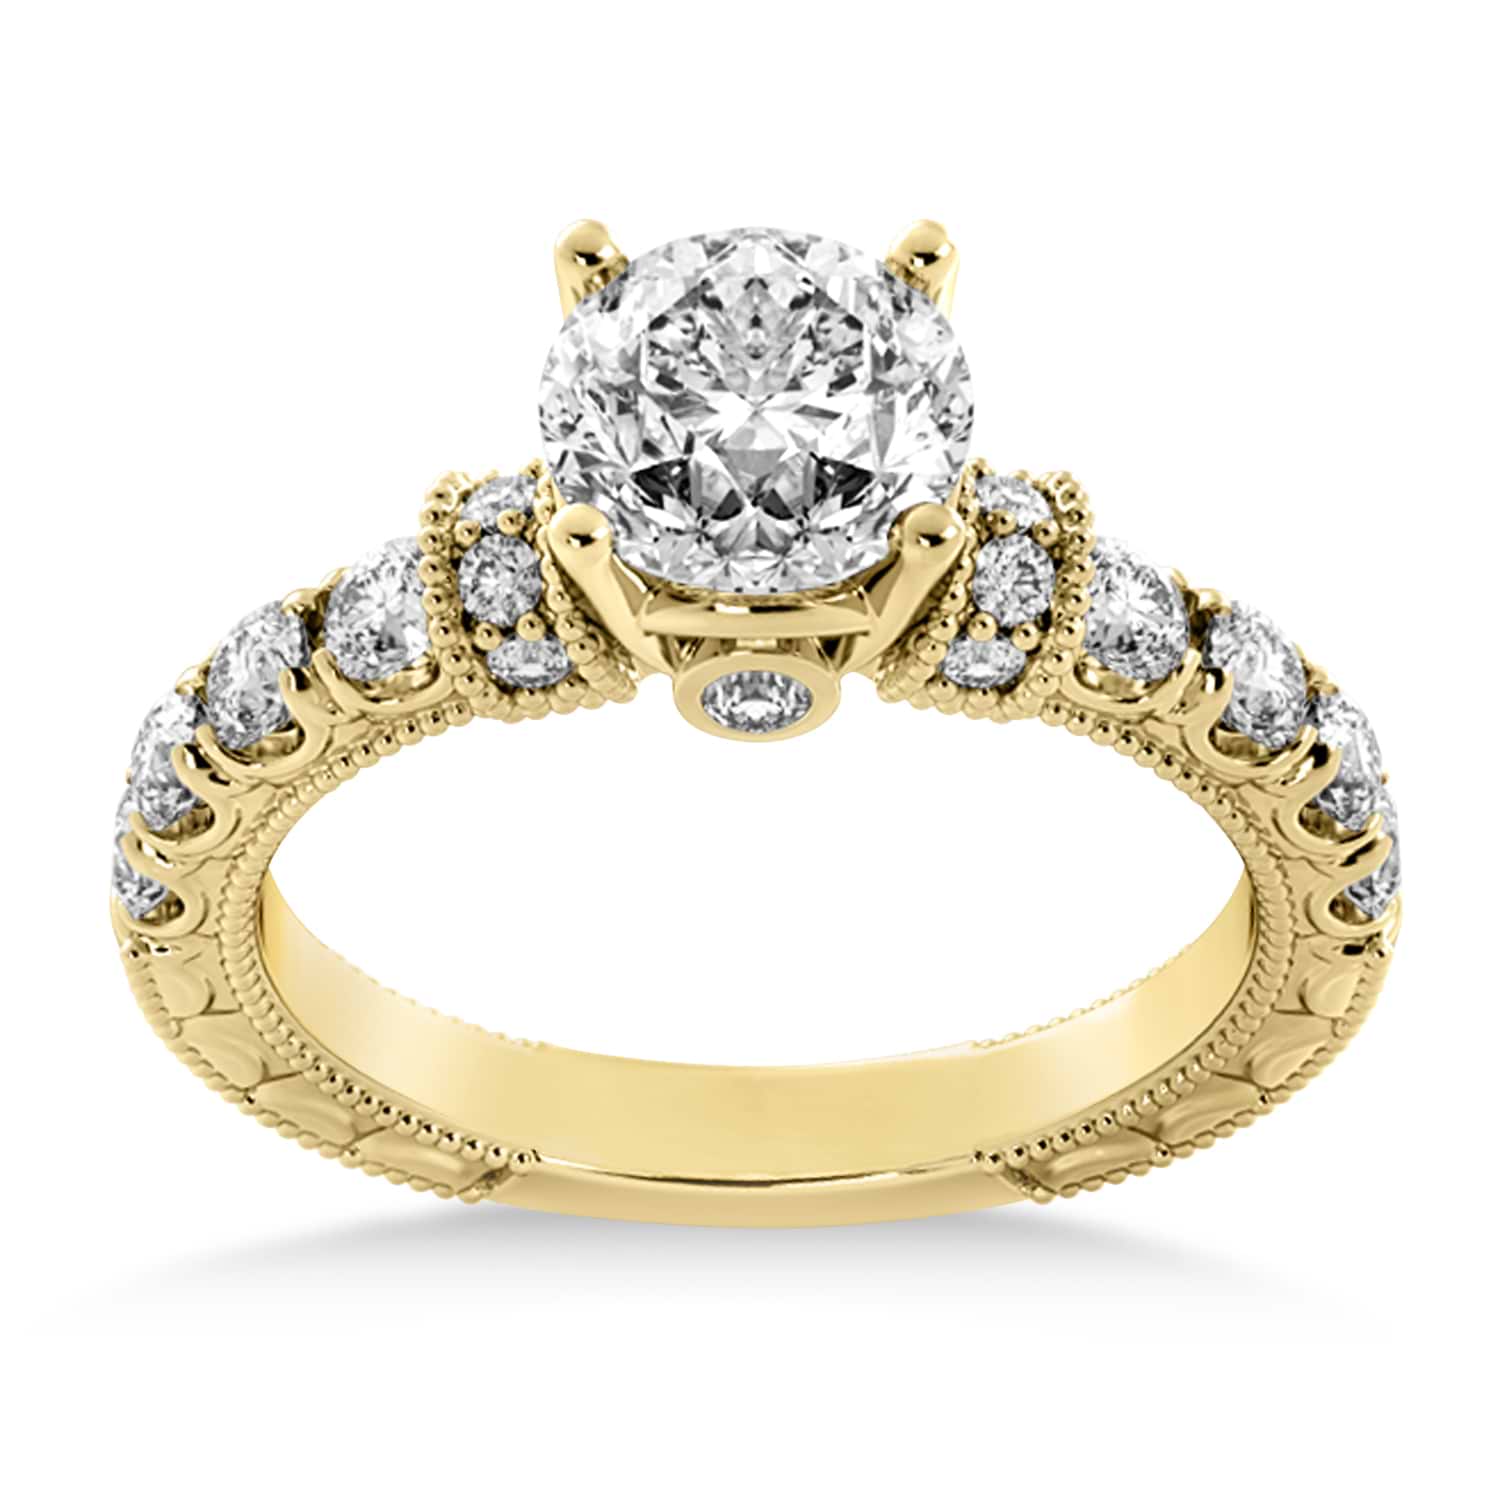 Diamond Vintage Style Engagement Ring 14k Yellow Gold (0.52ct)